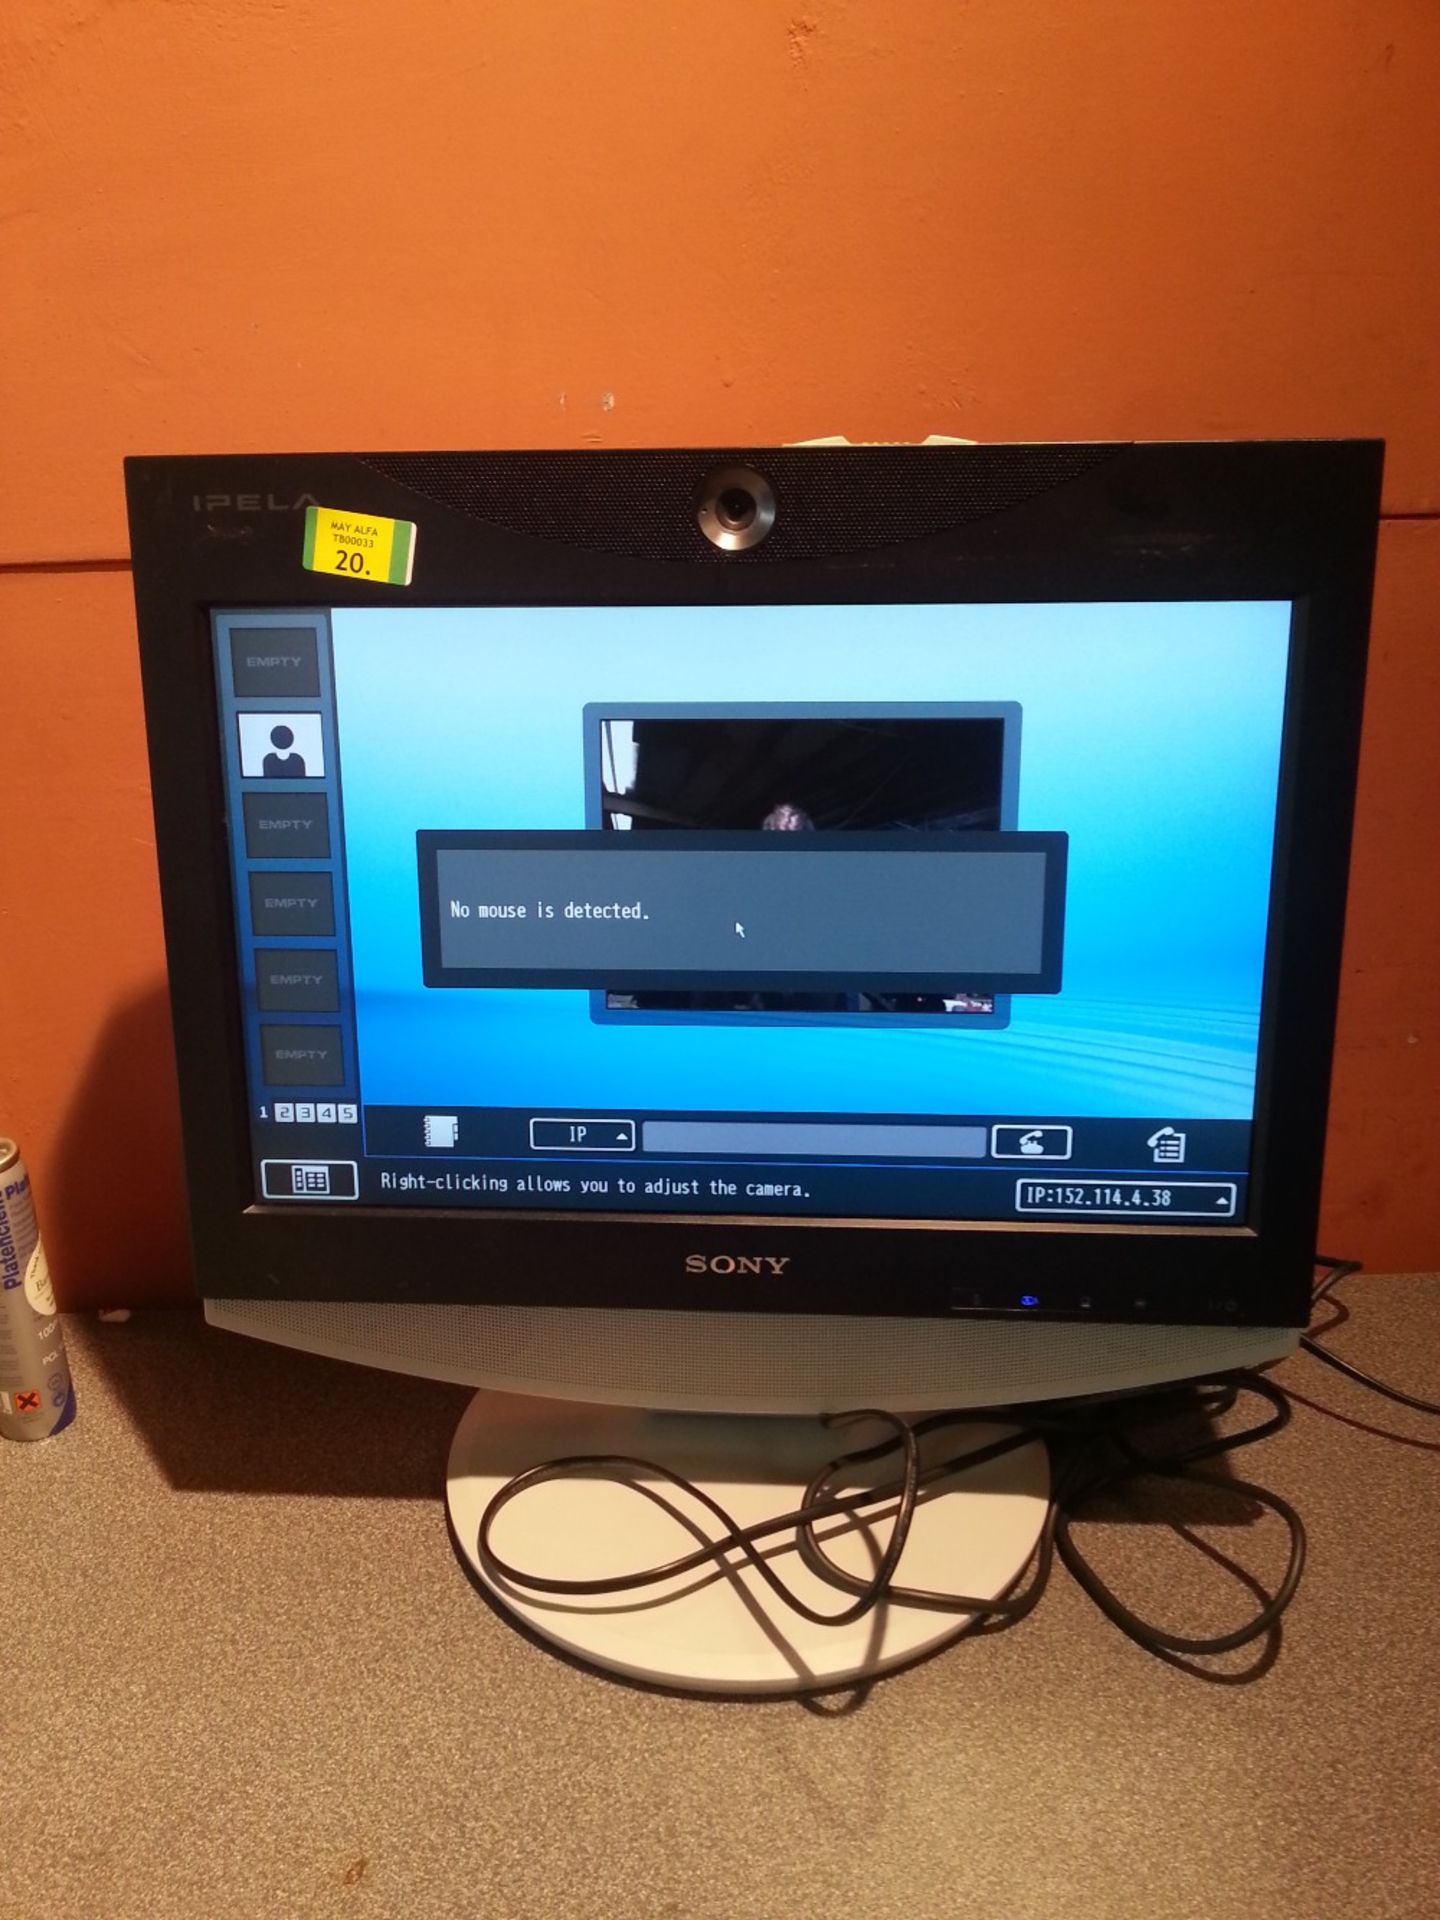 SONY  IPELA PCS-TL30 Video Conferencing System - With Flight Case - PSU - Powers On Displays An imag